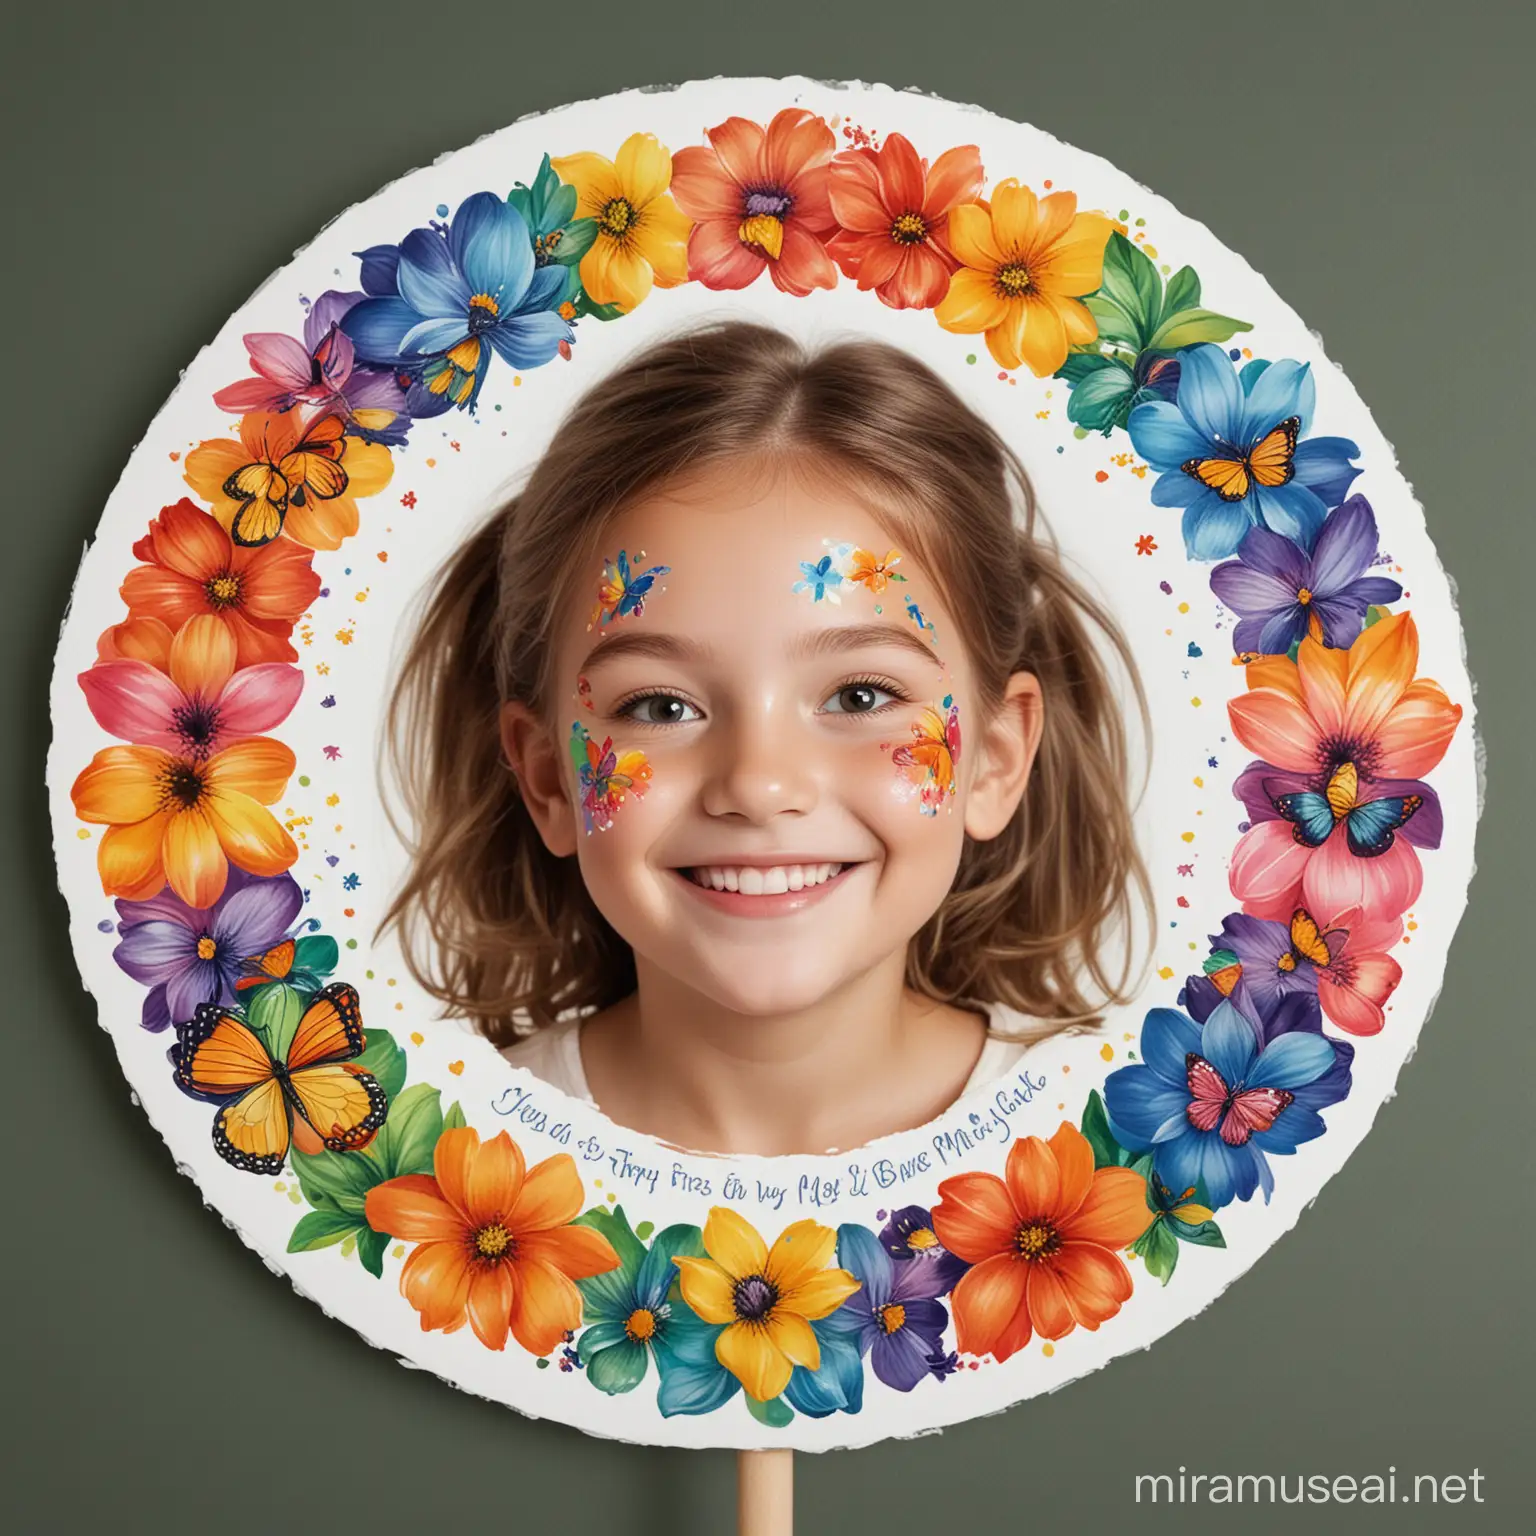 The logo is in the shape of a blooming flower, where each petal is made in a different color of the rainbow and decorated with face painting patterns such as butterflies, bees and small rainbows. In the center of the flower is a smiling child's face with face painting. The studio name is placed around the flower in a circle or underneath in a bright, cheerful font.